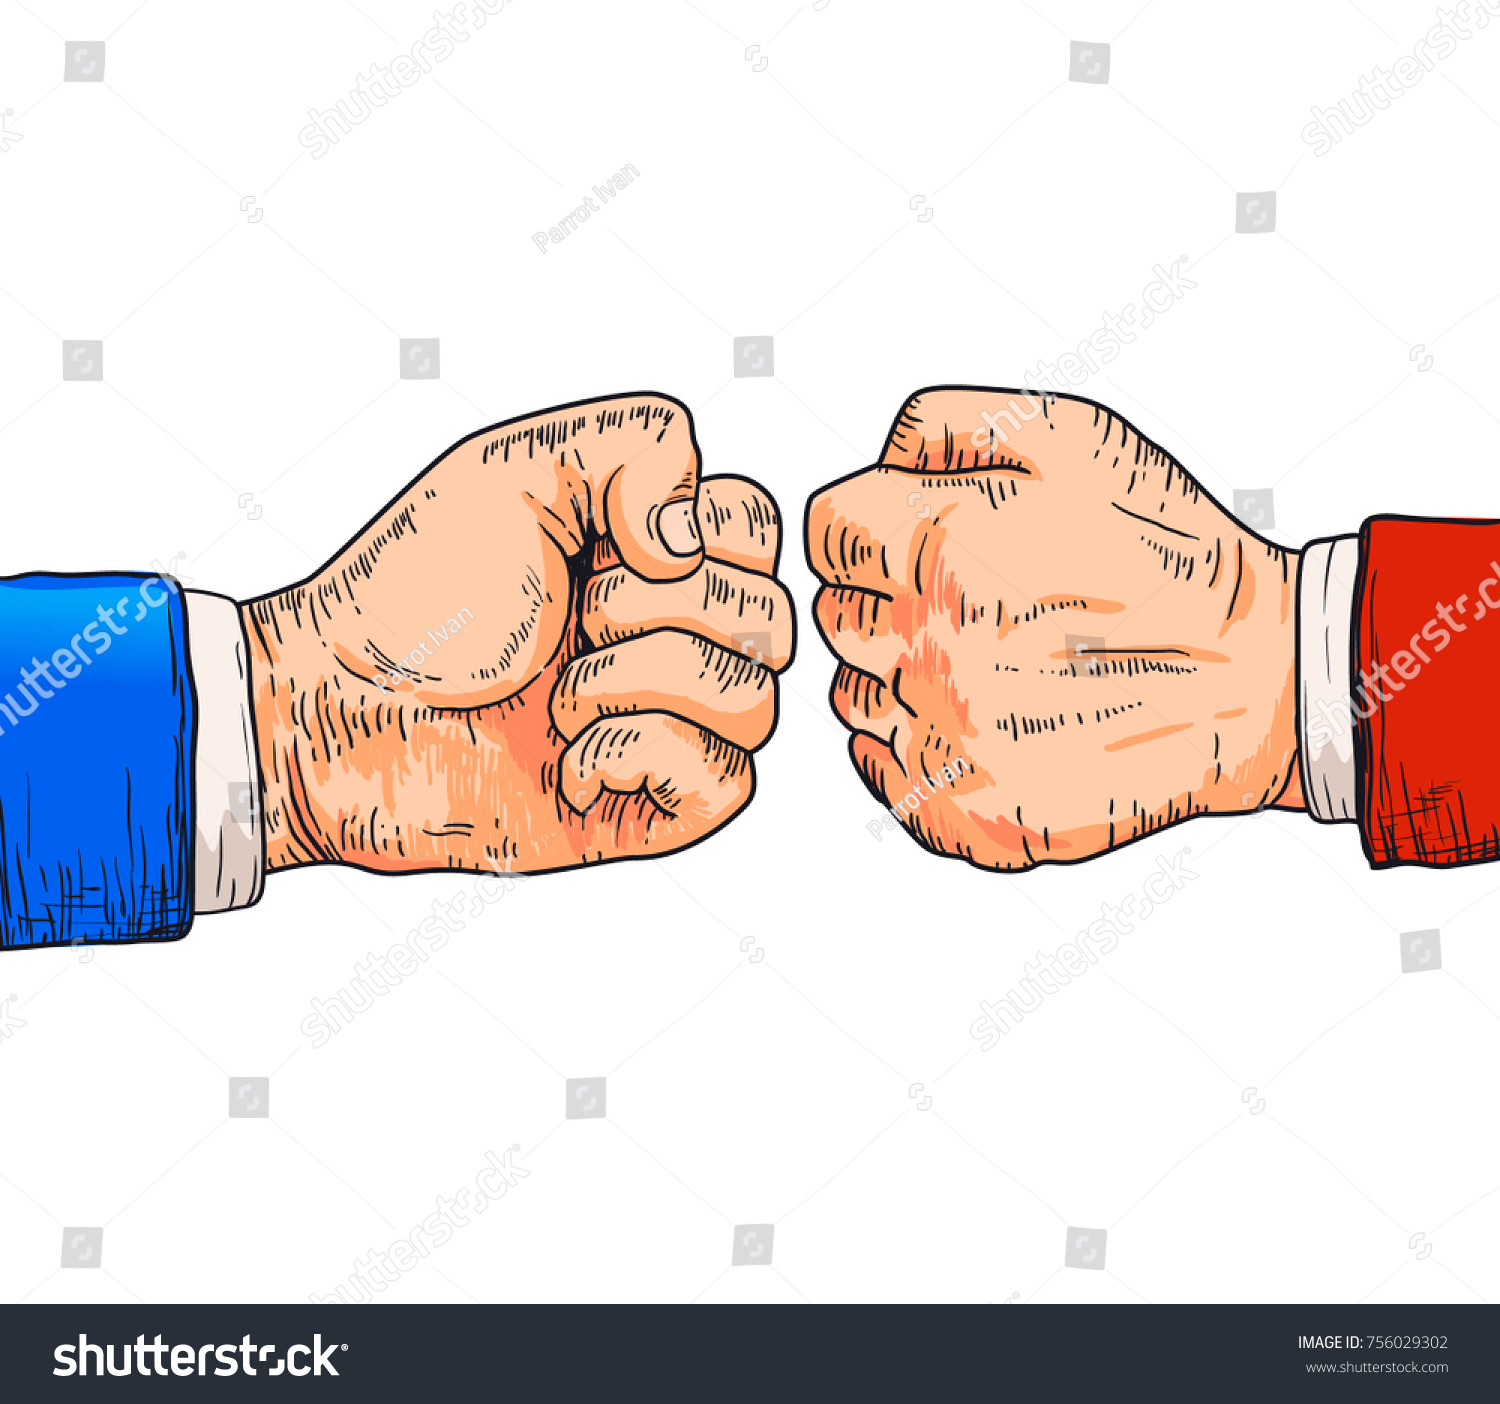 Two Fighting Fists Fighting Cartoon Gesture Stock Photo (Photo ...